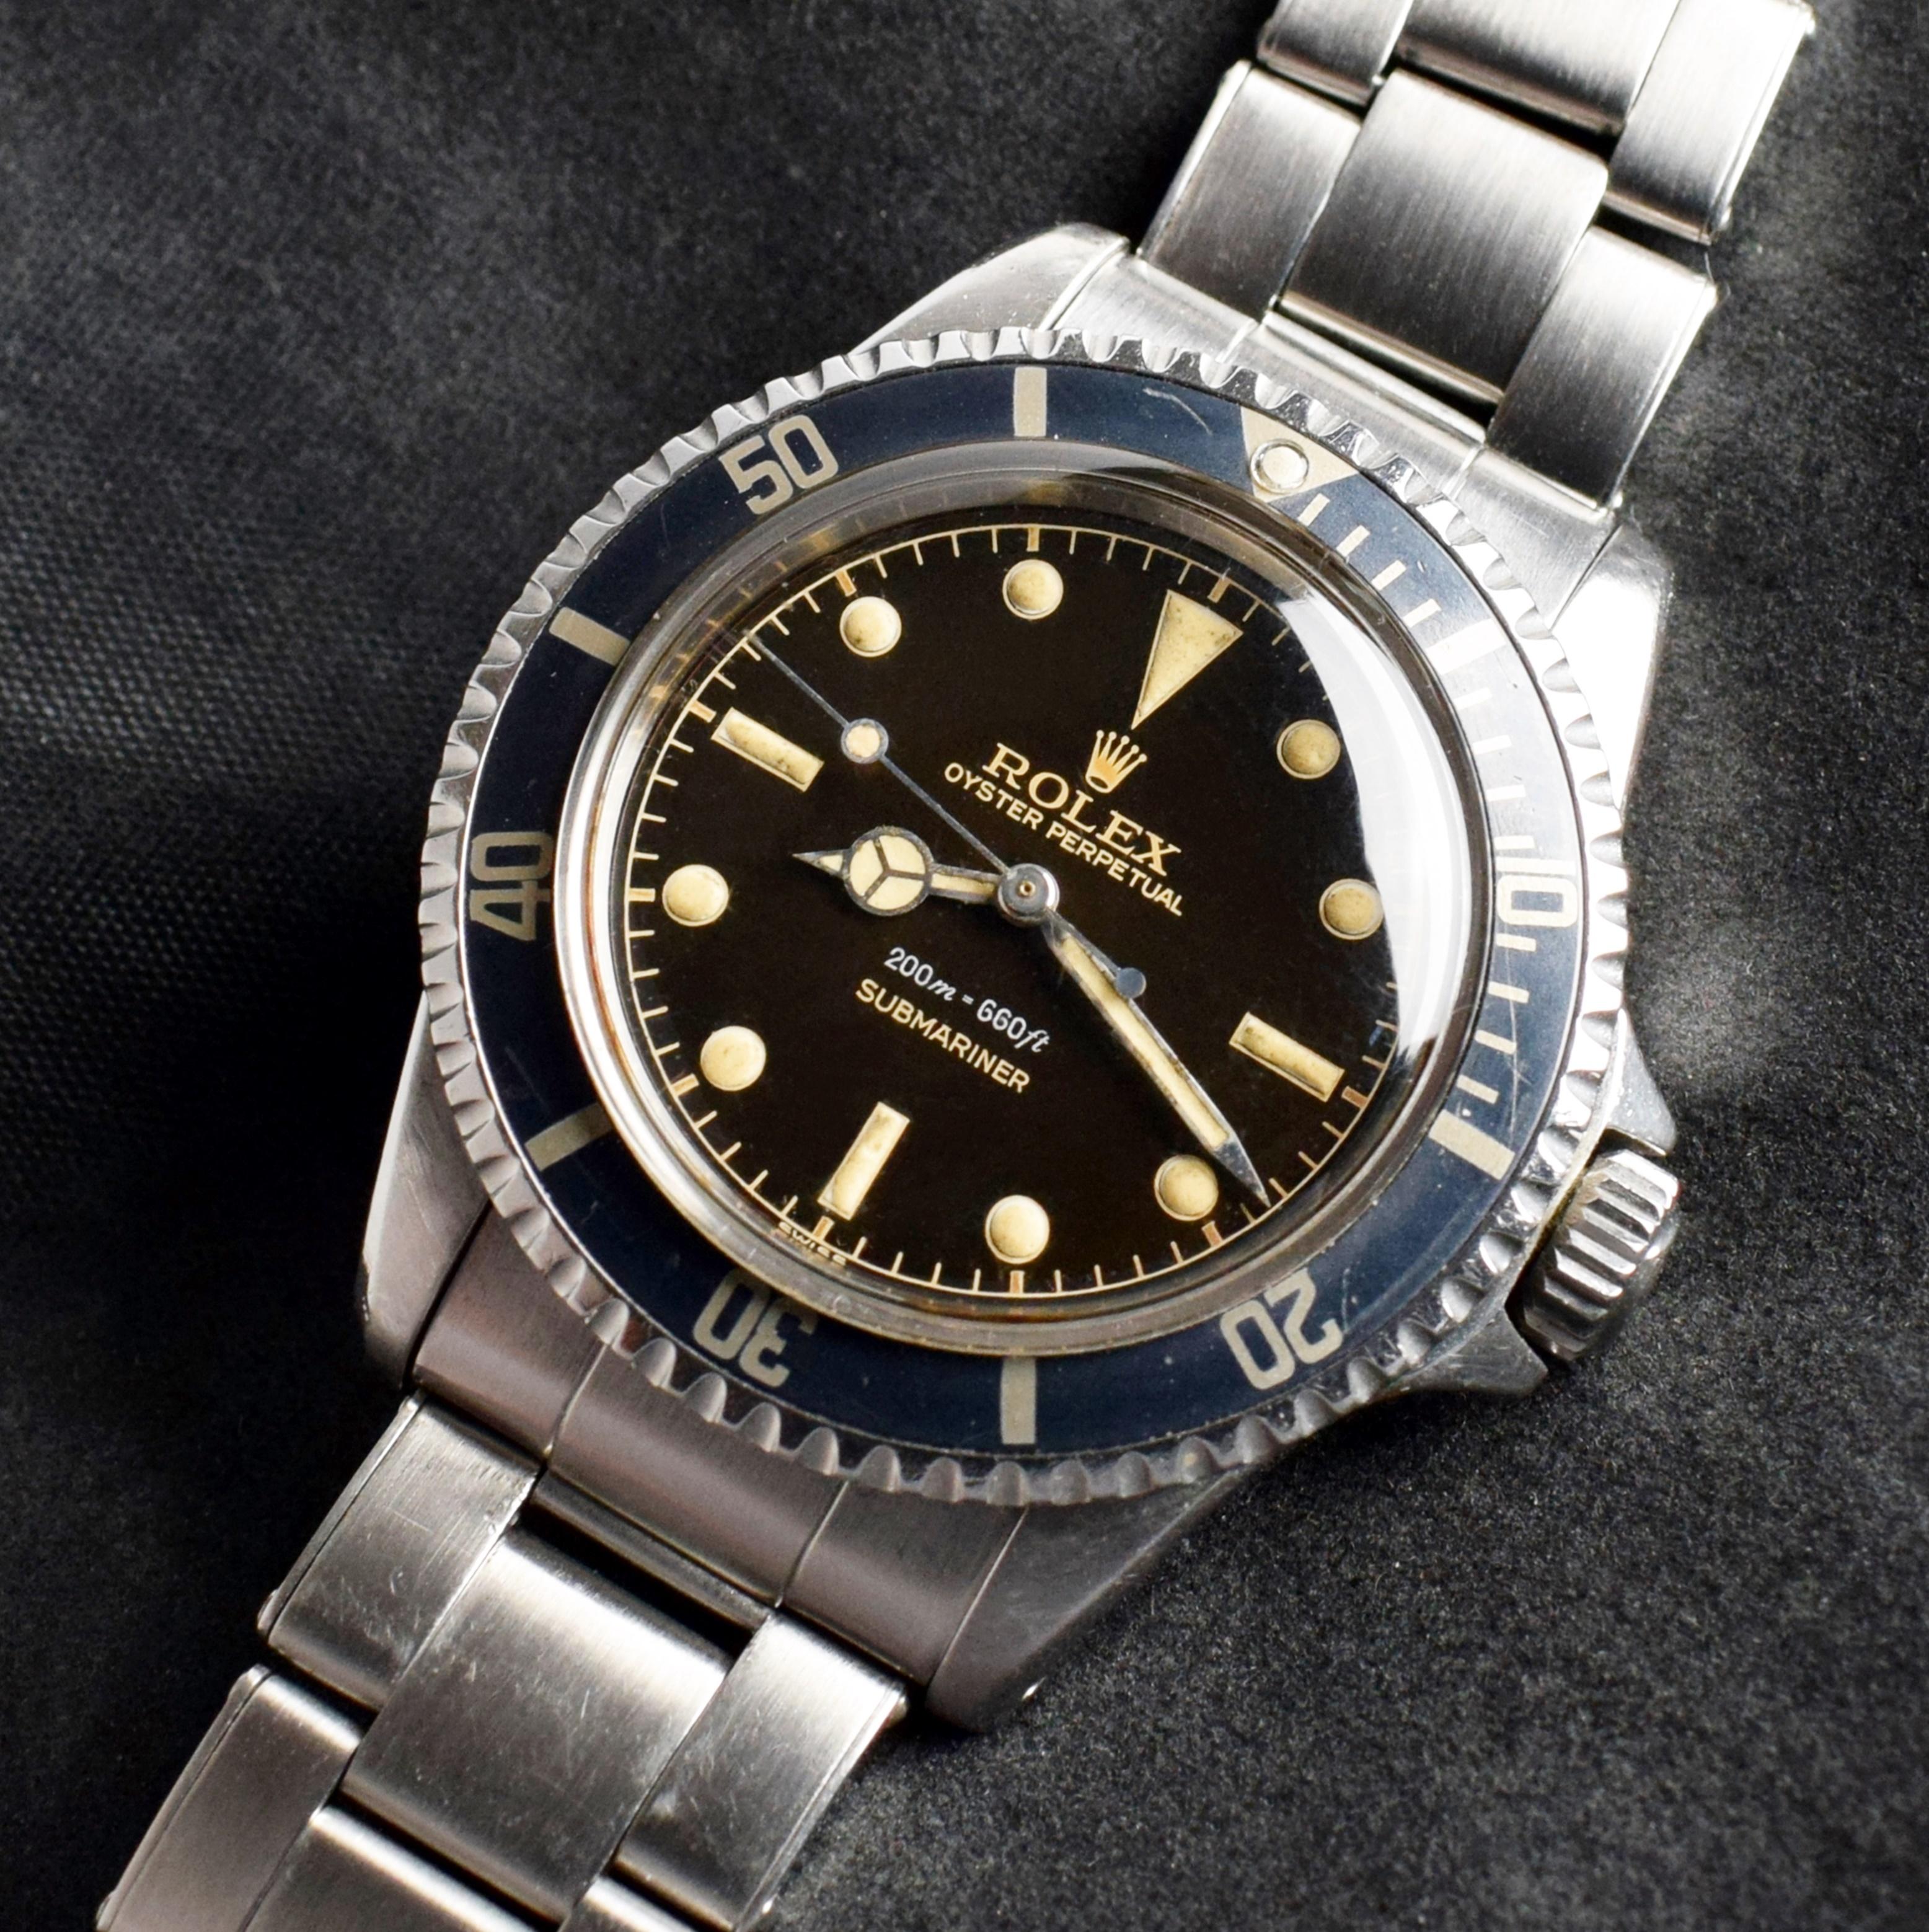 Brand: Vintage Rolex
Model: 5512
Year: 1960
Serial number: 55xxxx
Reference: C03729; C03603

Case: Show sign of wear with slight polish from previous; inner case back stamped 5512 III.60; the bottom part of the serial engraving has been scratched